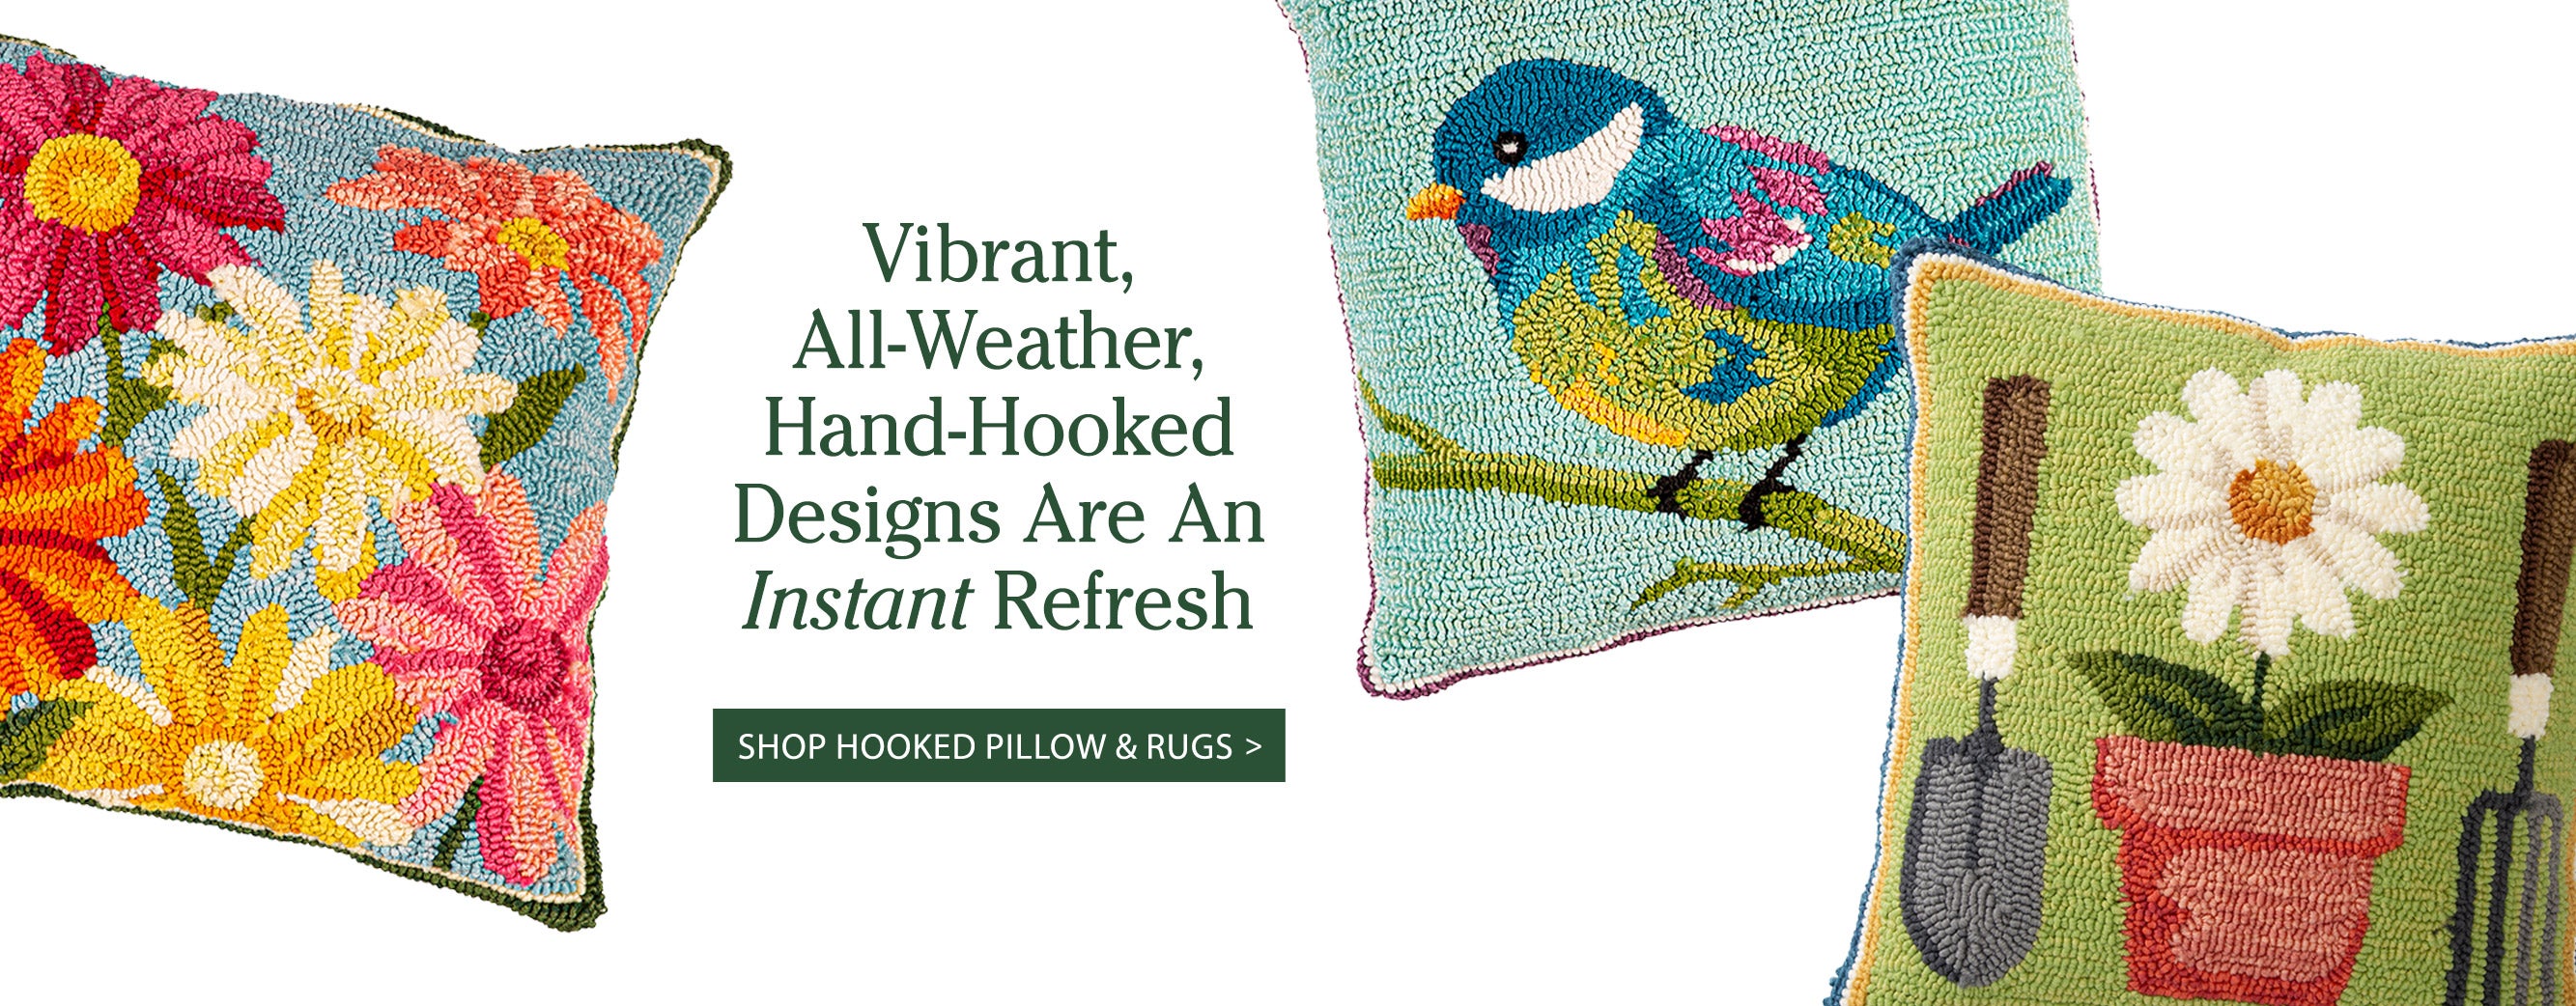 Image of three throw pillows. Vibrant, All-Weather, Hand-Hooked Designs Are An Instant Refresh SHOP HOOKED PILLOW & RUGS